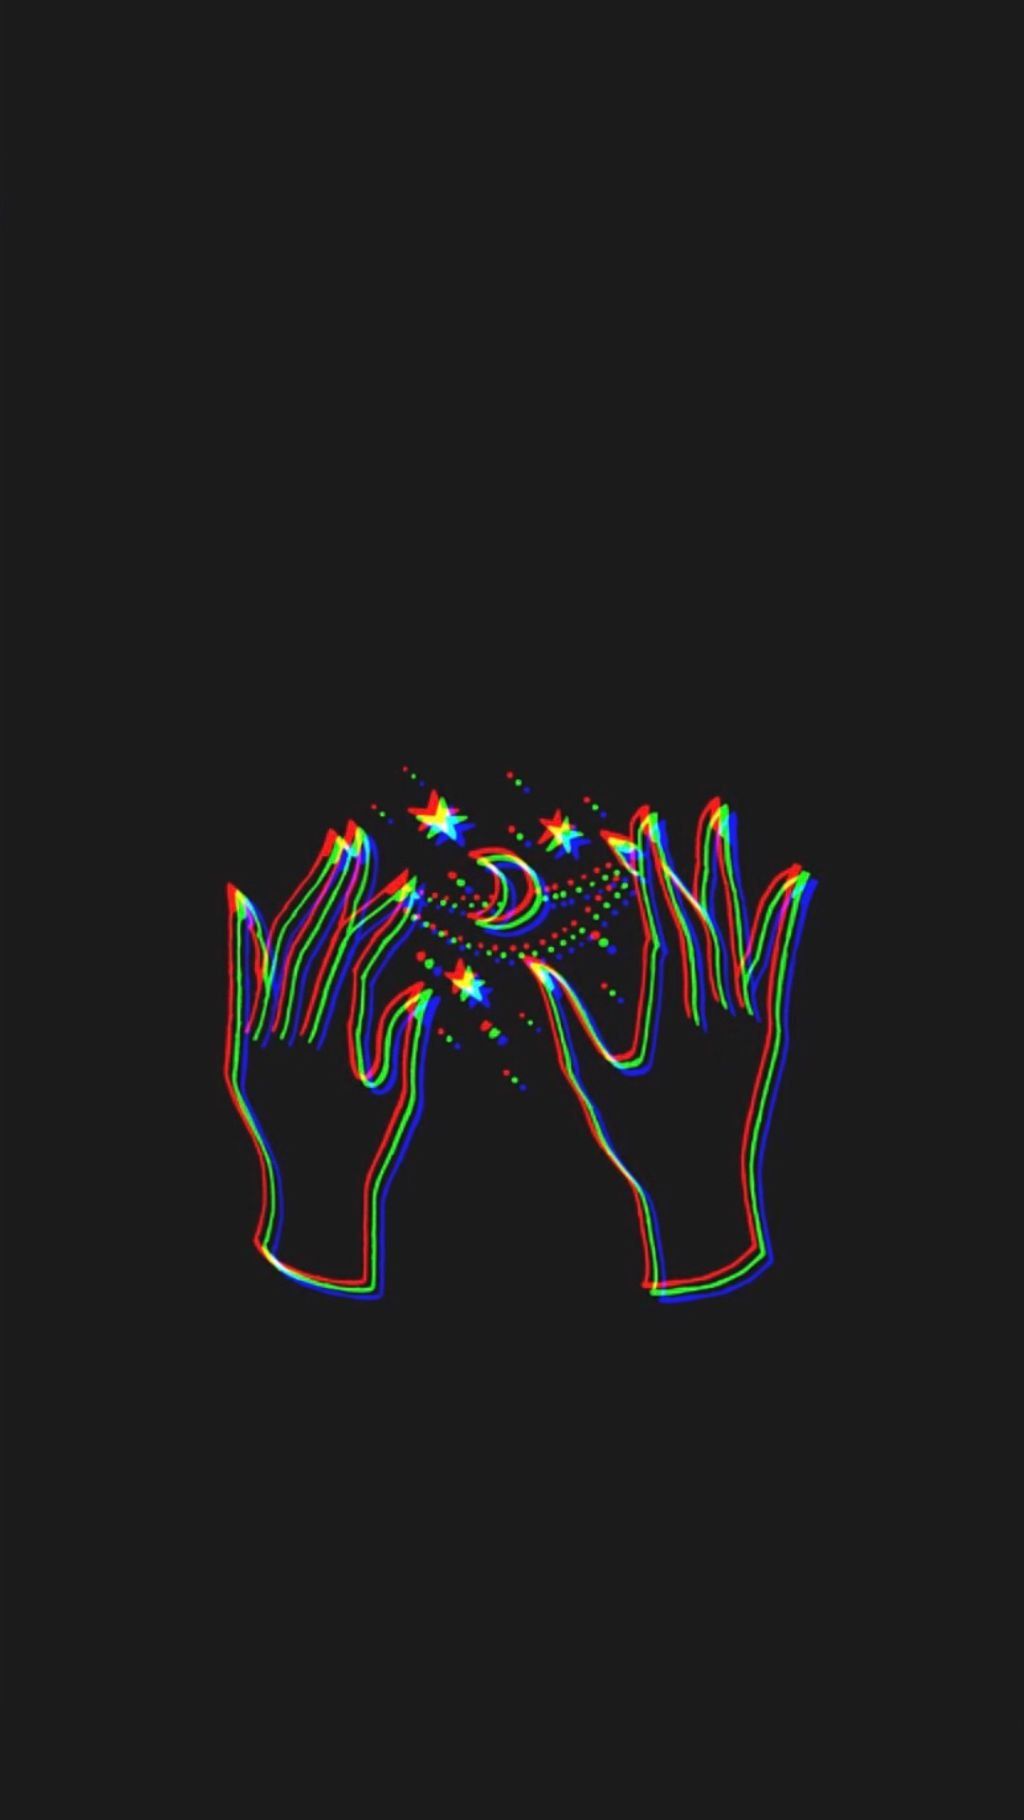 Aesthetic hands wallpaper for your phone - IPhone, grunge